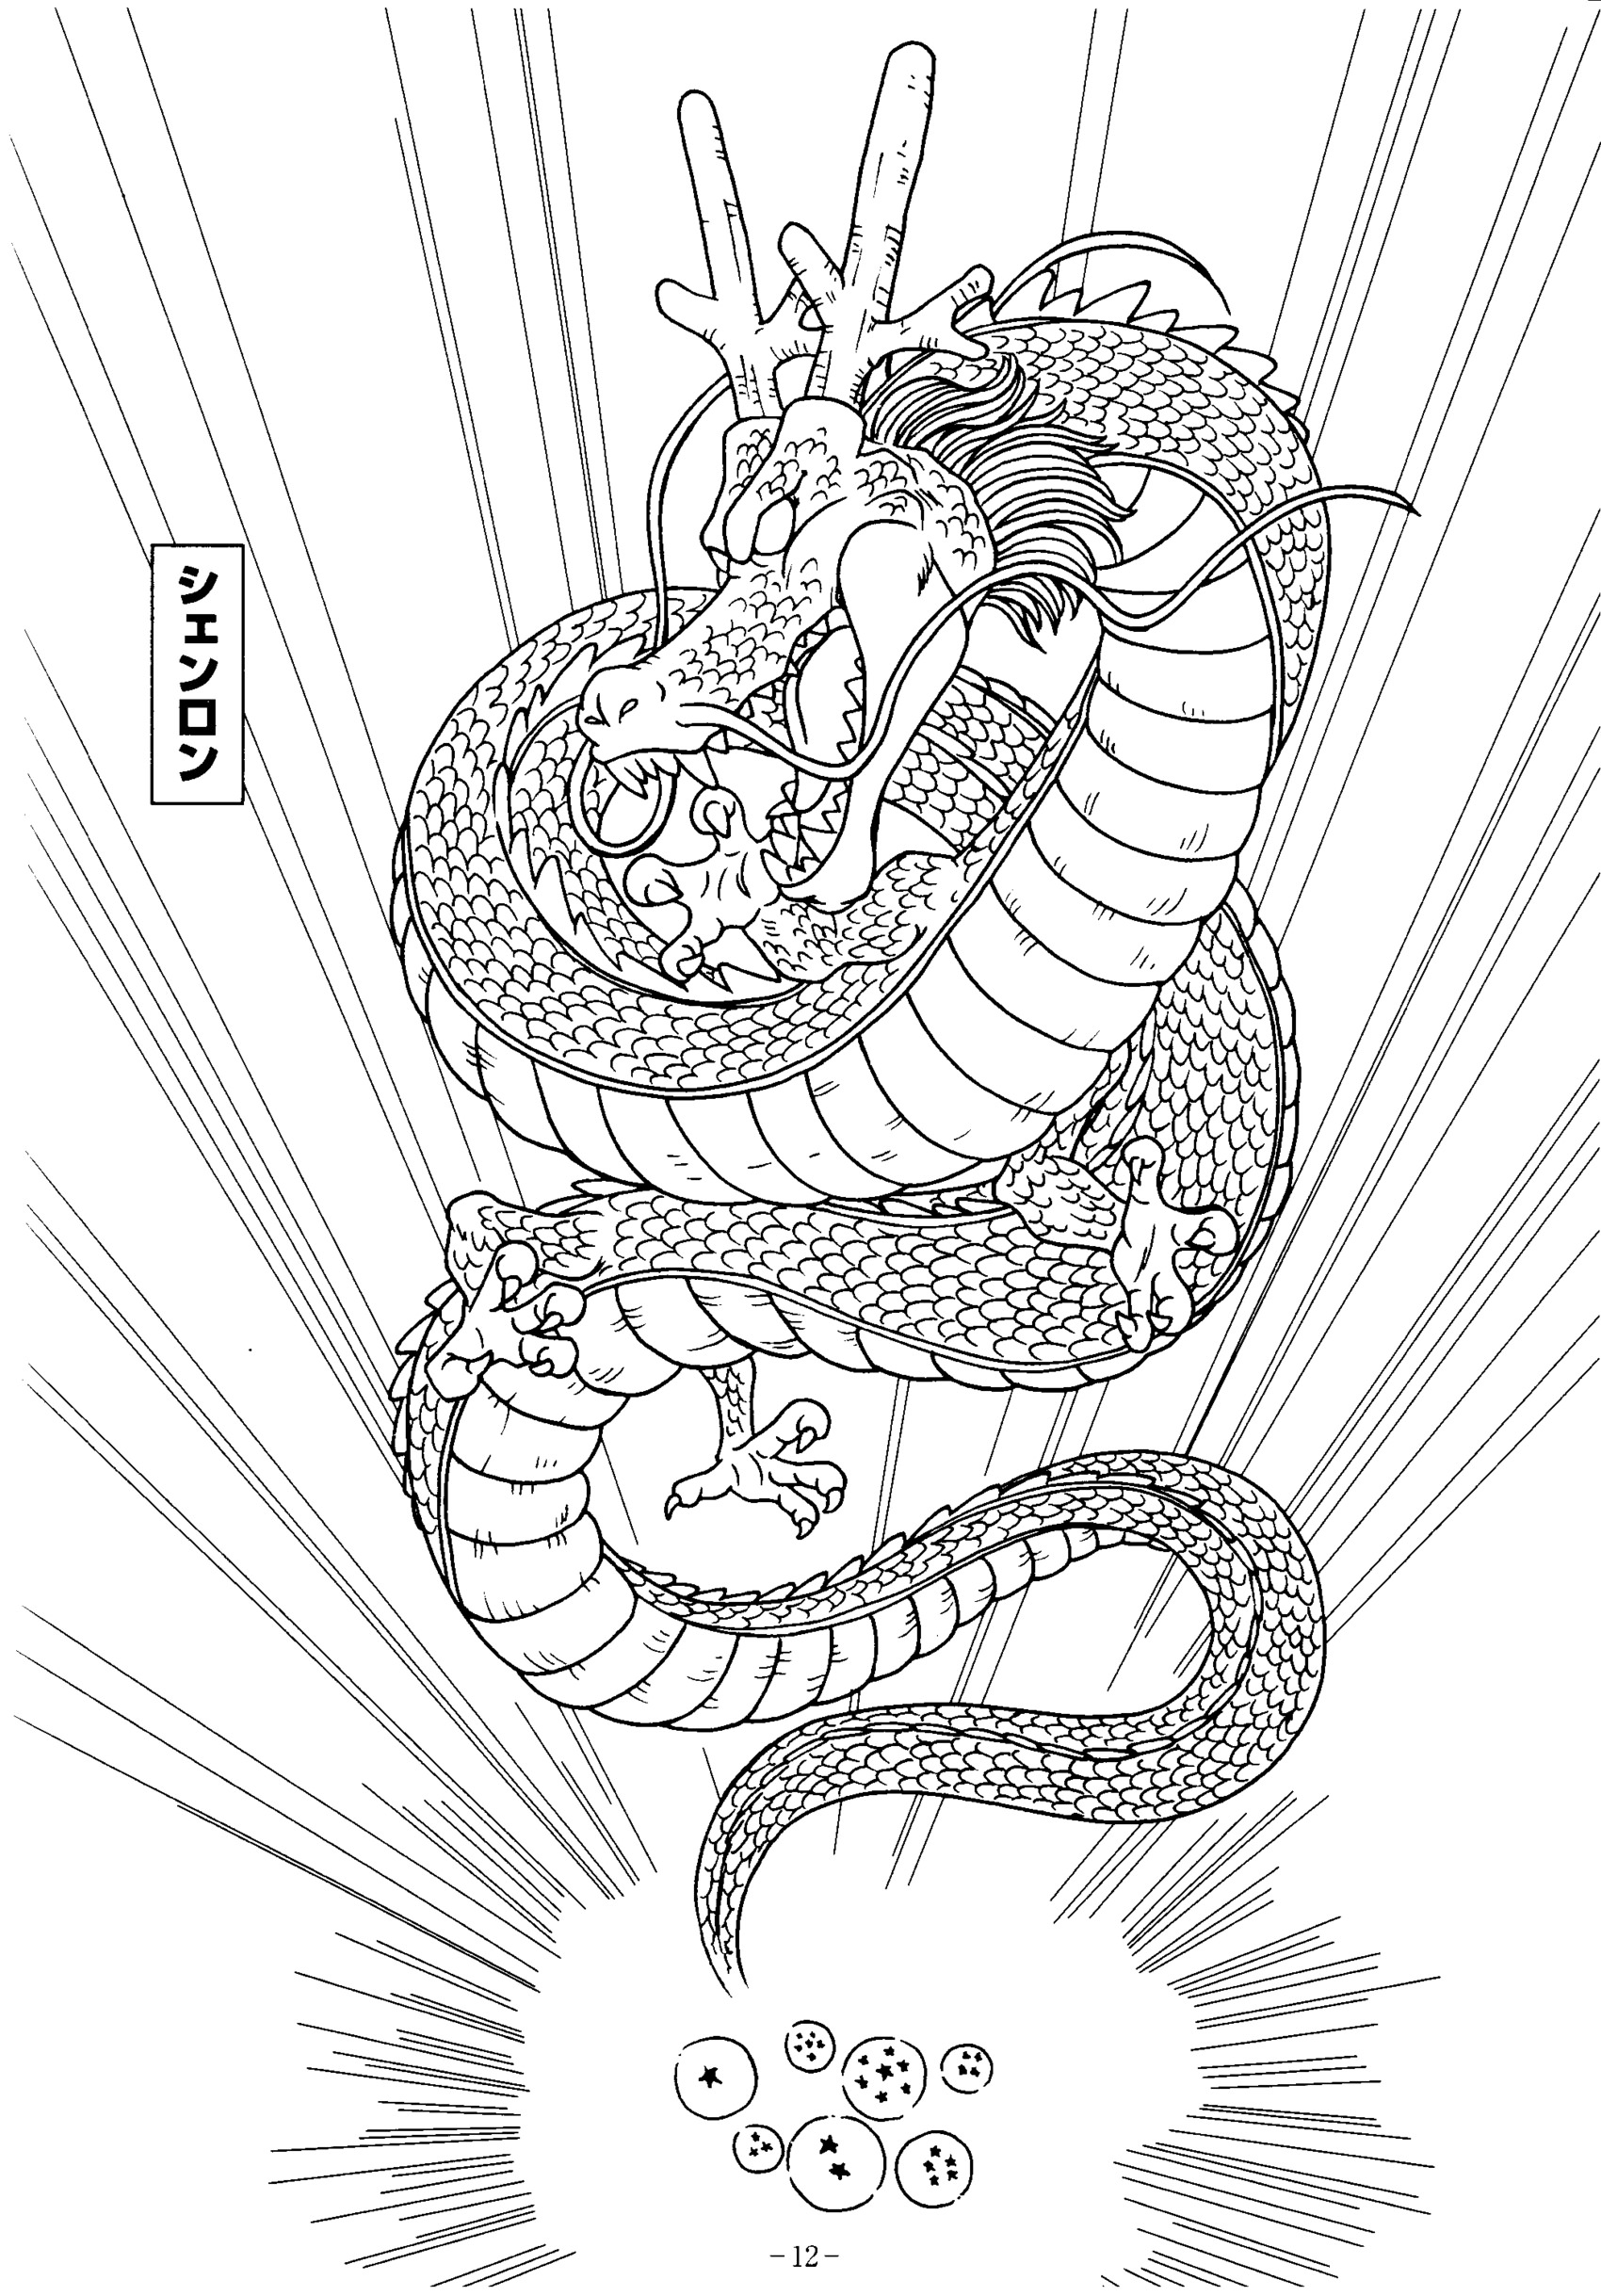 Free Dragon Ball Z coloring page to download : Shenron